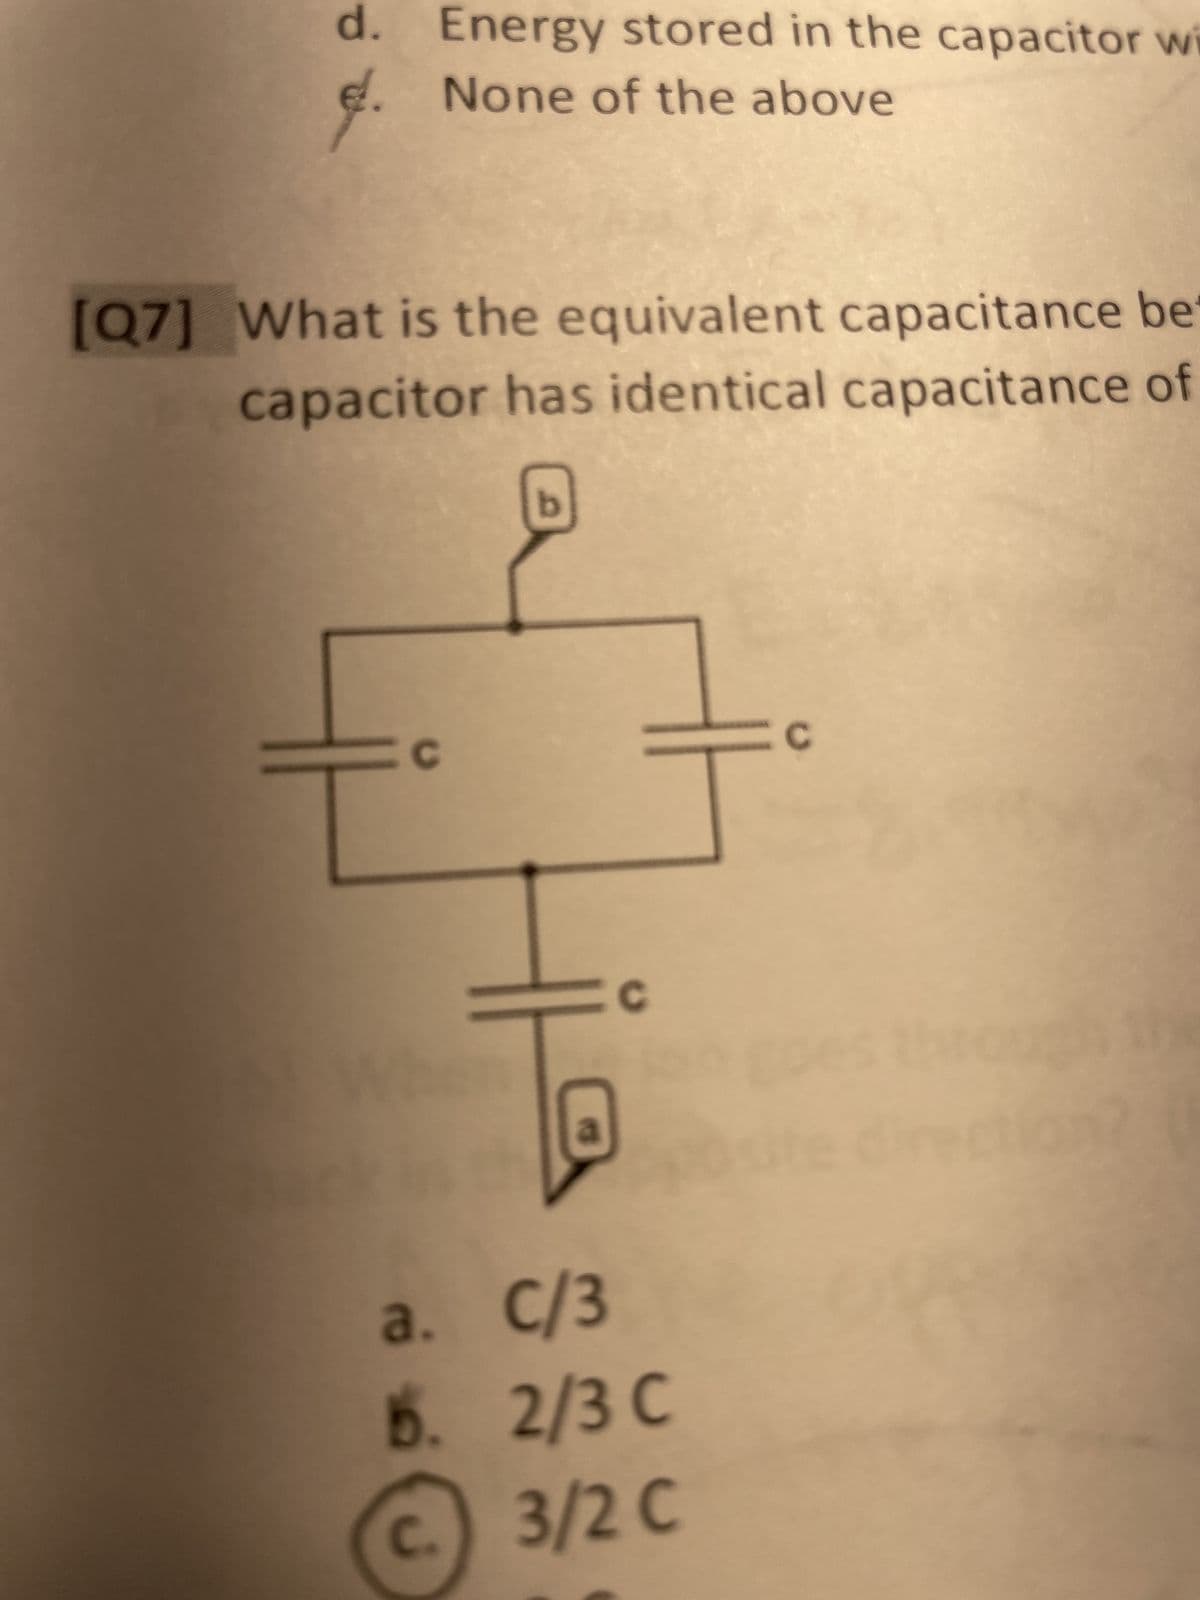 d. Energy stored in the capacitor wi
e. None of the above
[Q7] What is the equivalent capacitance be
capacitor has identical capacitance of
=C
Whe
b
a
a.
5.
C
Back posit
C/3
2/3 C
c.) 3/2 C
C